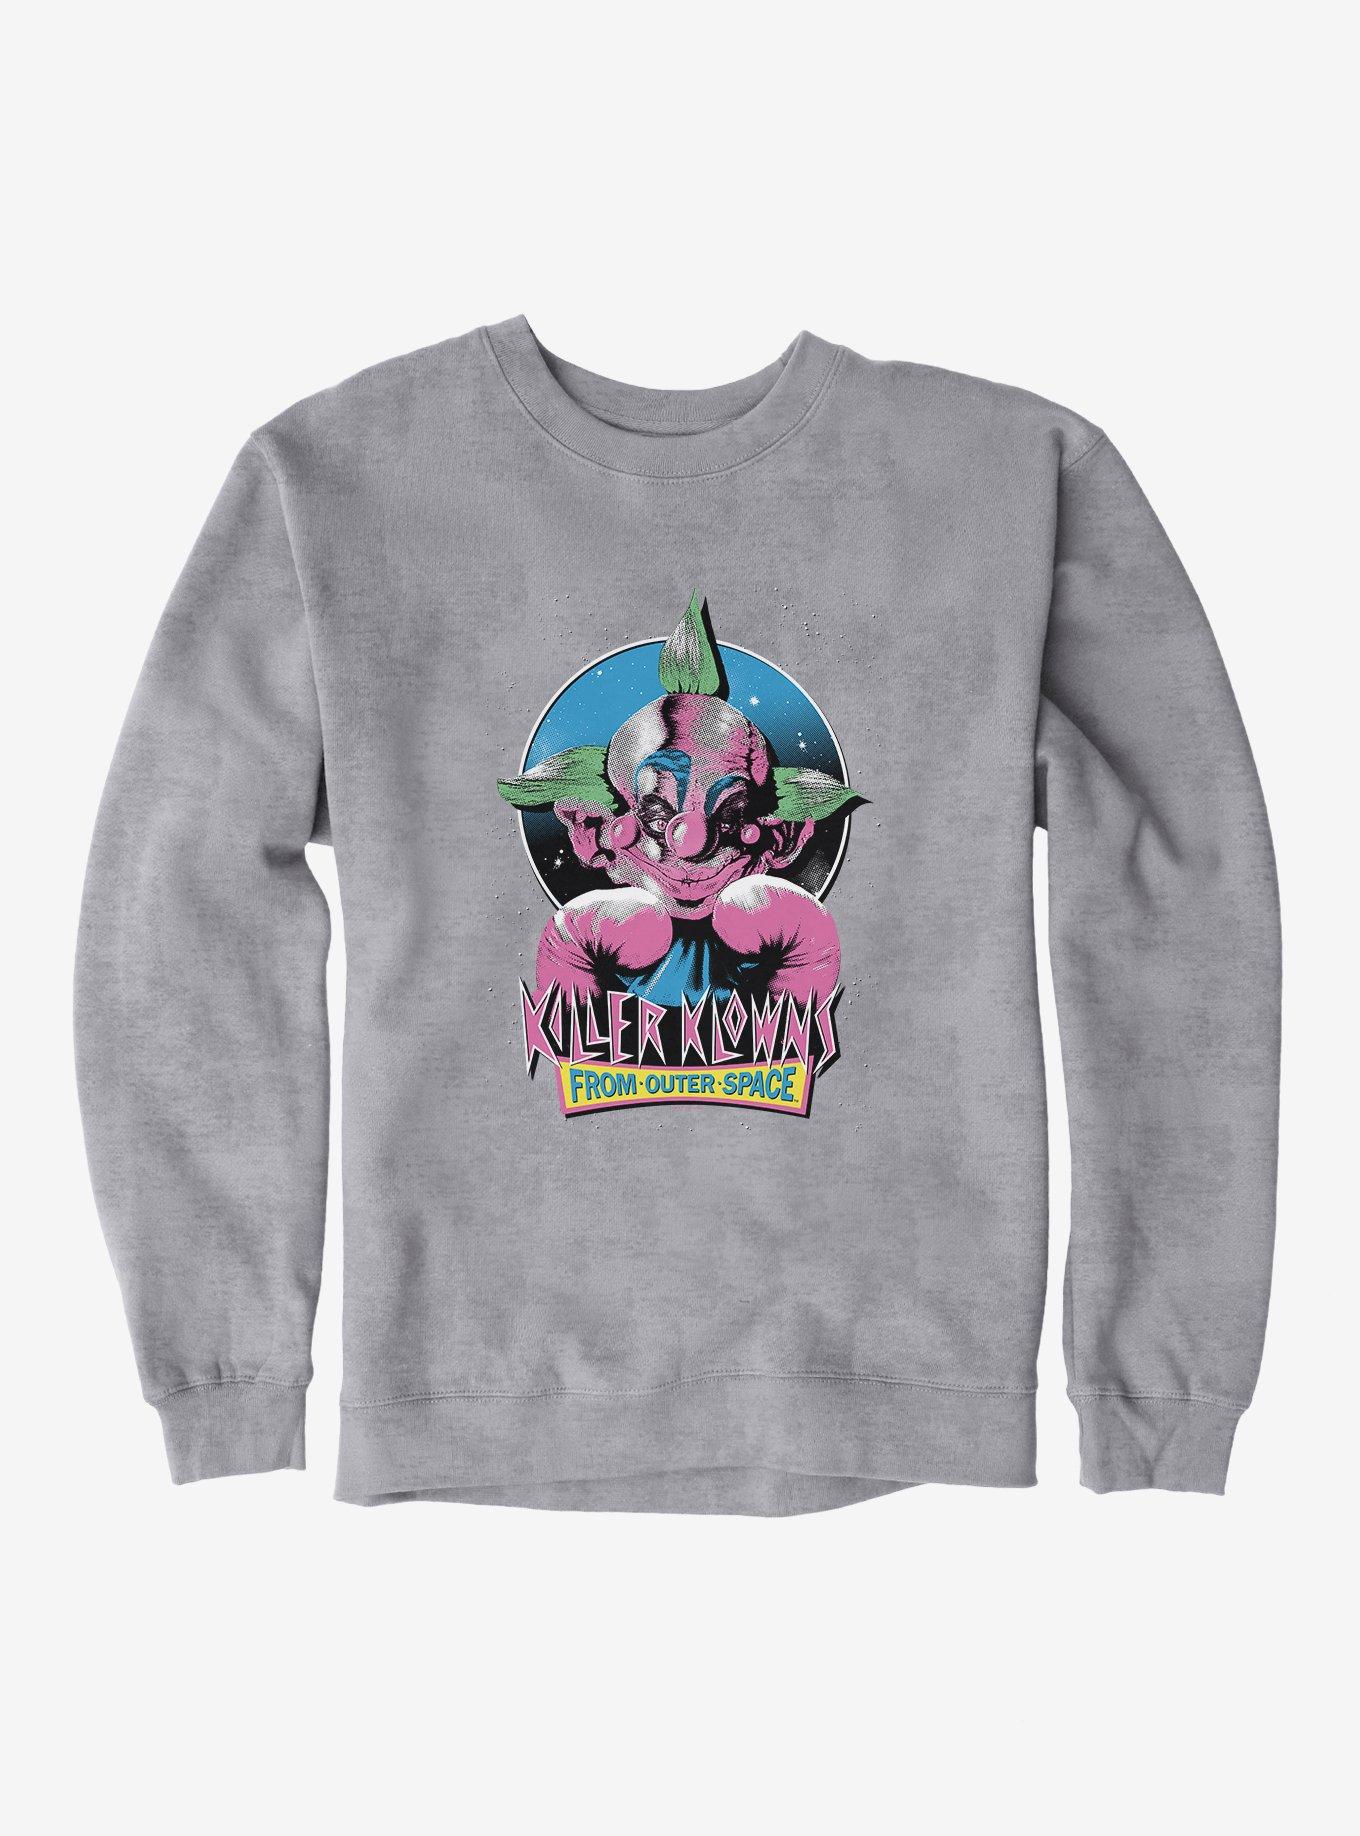 Killer Klowns From Outer Space Shorty Sweatshirt